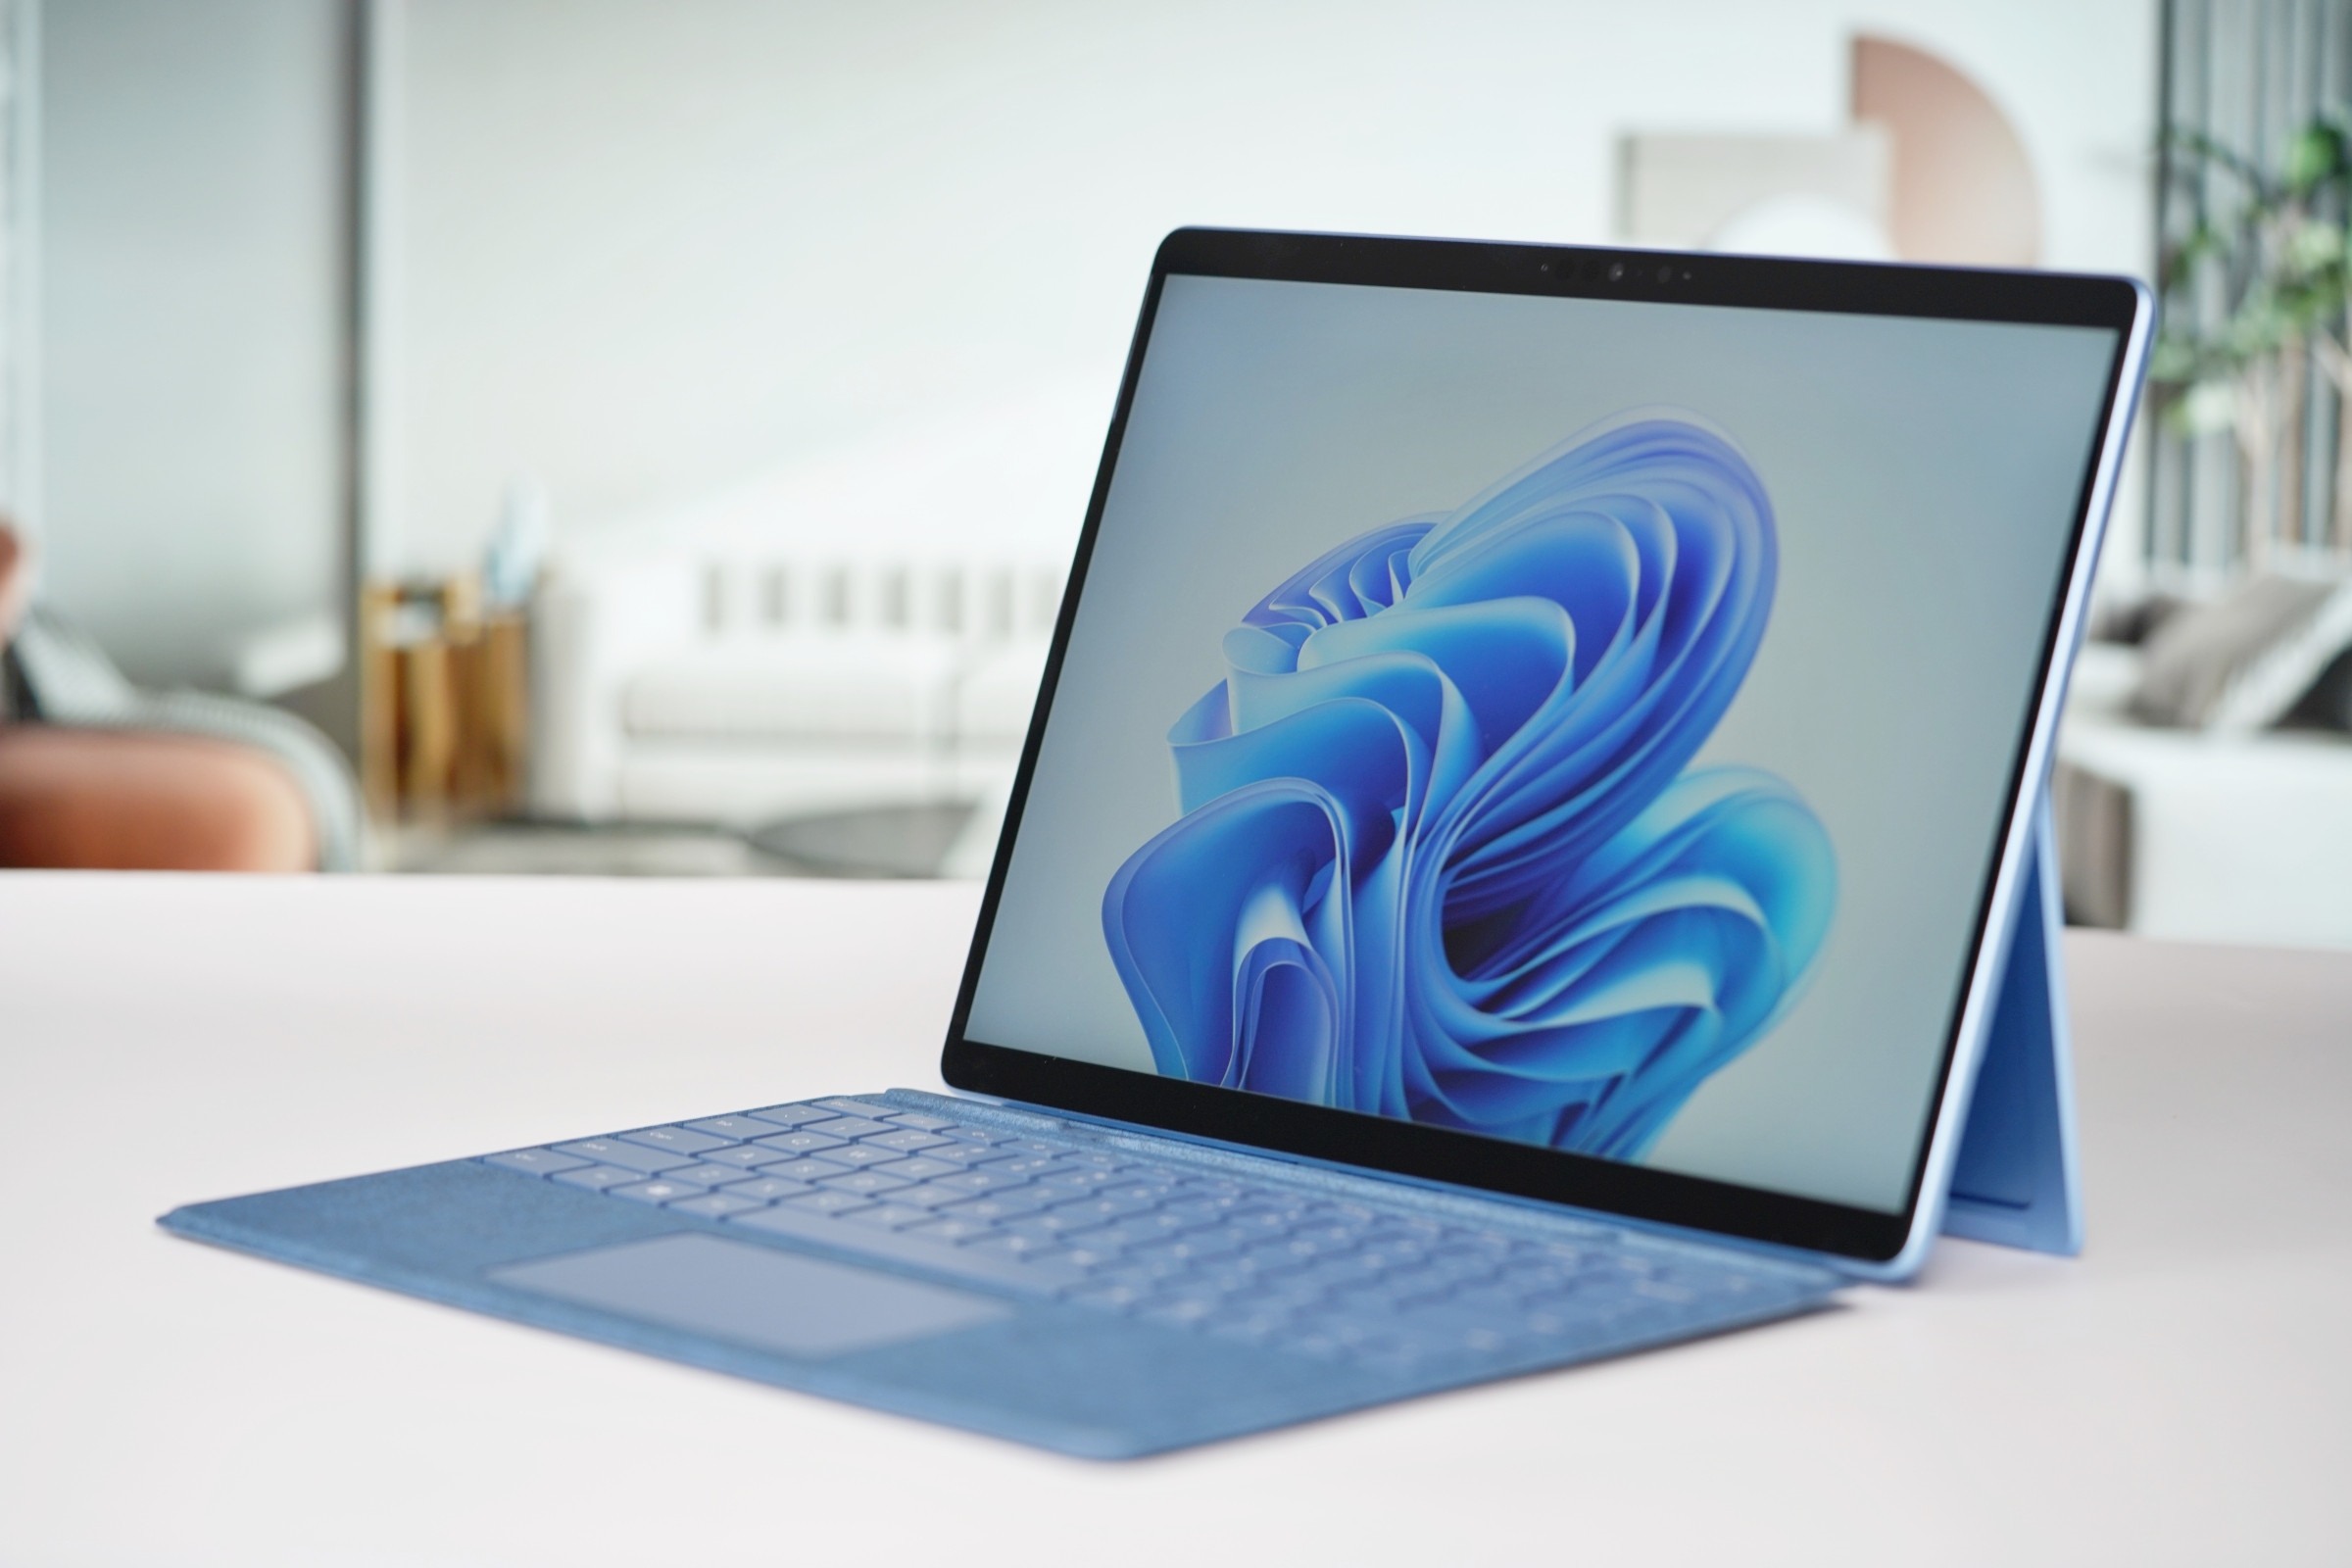 In the hands of Surface Pro 9, eye-catching design, 878g weight, a formidable opponent of Macbook Air M2